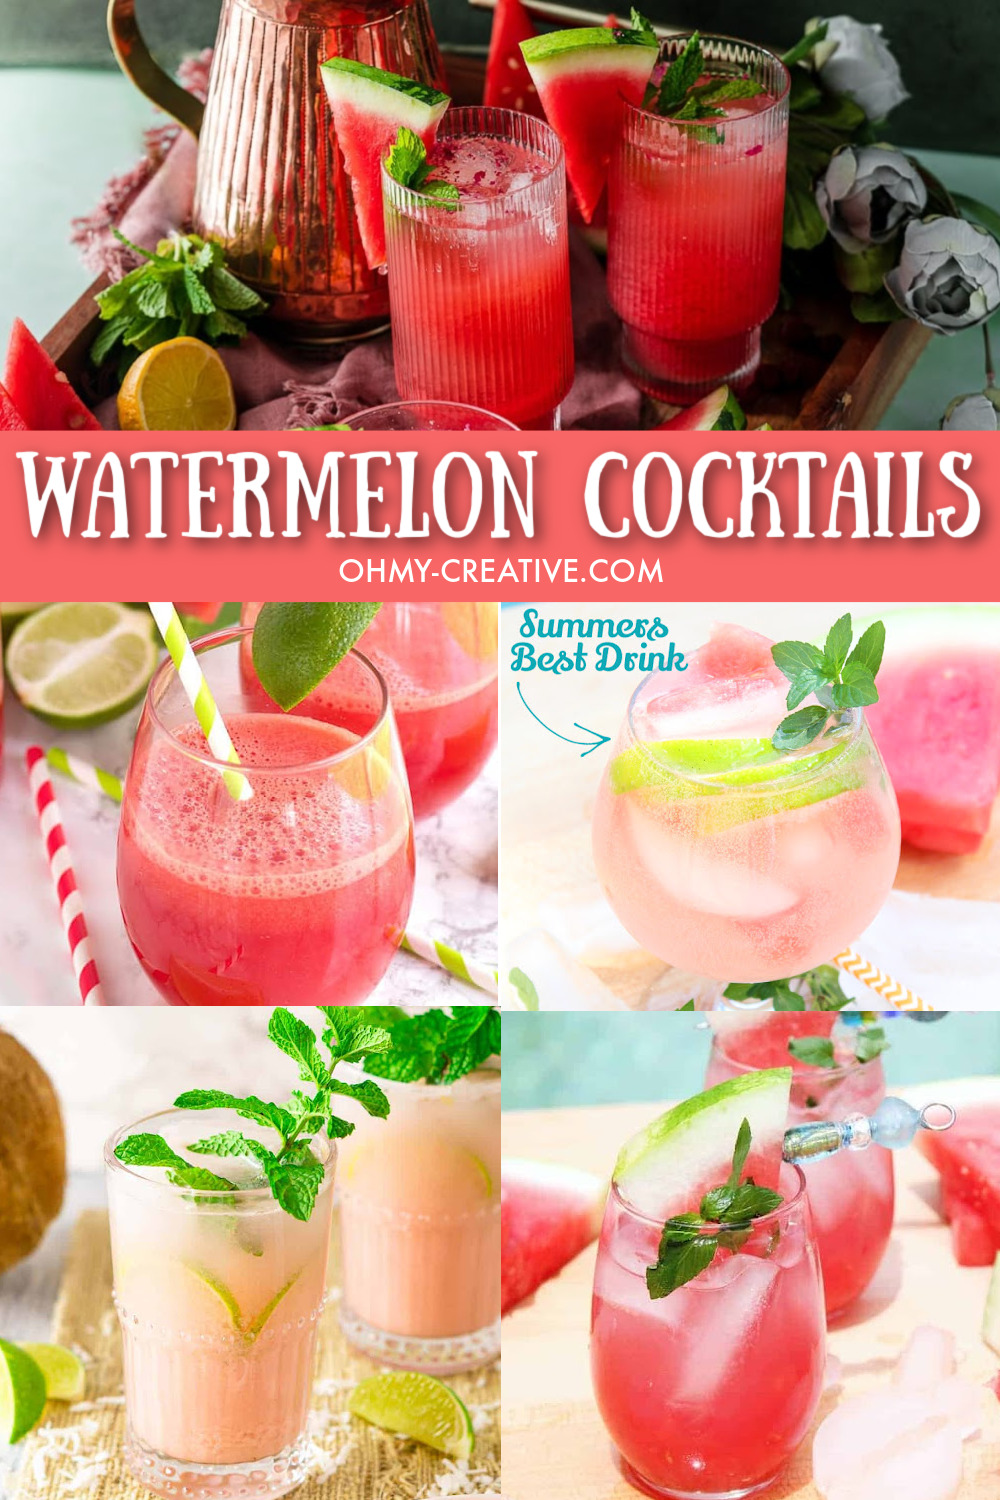 Here is a great collage of watermelon cocktails to enjoy all summer long including watermelon mojitos!